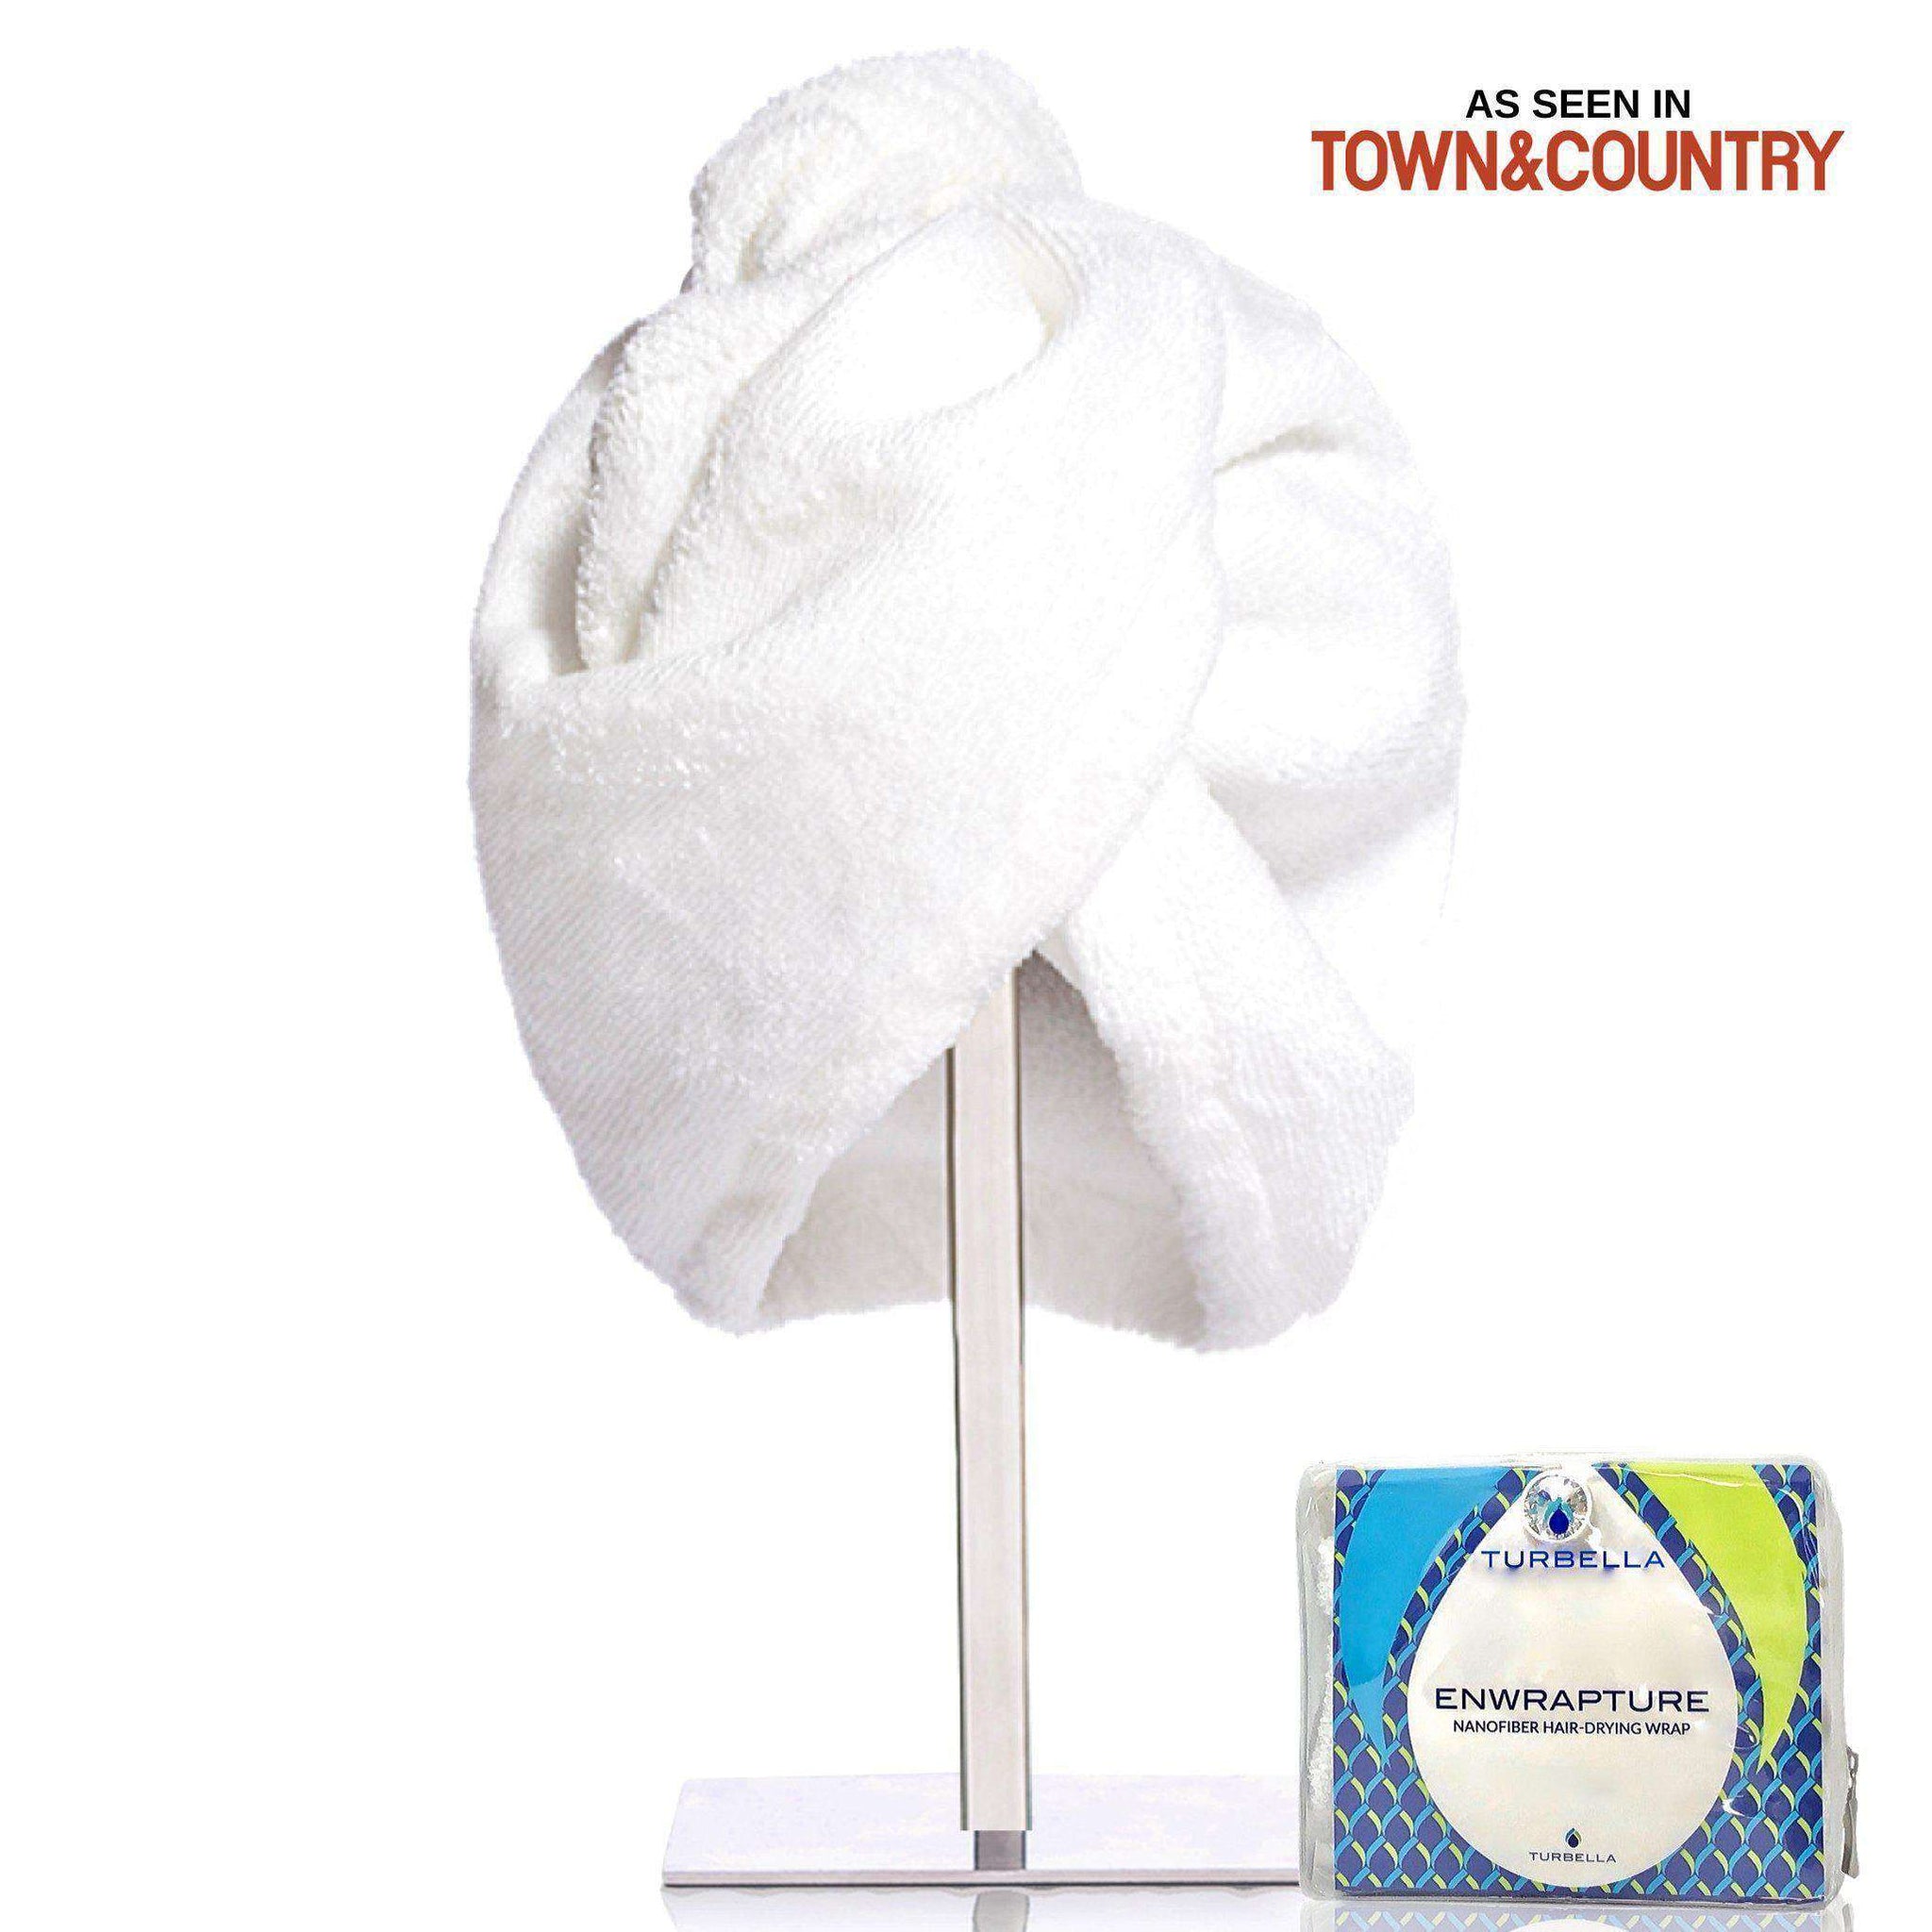 Ultra-Absorbent Quick-Dry Hair + Body Towel - White